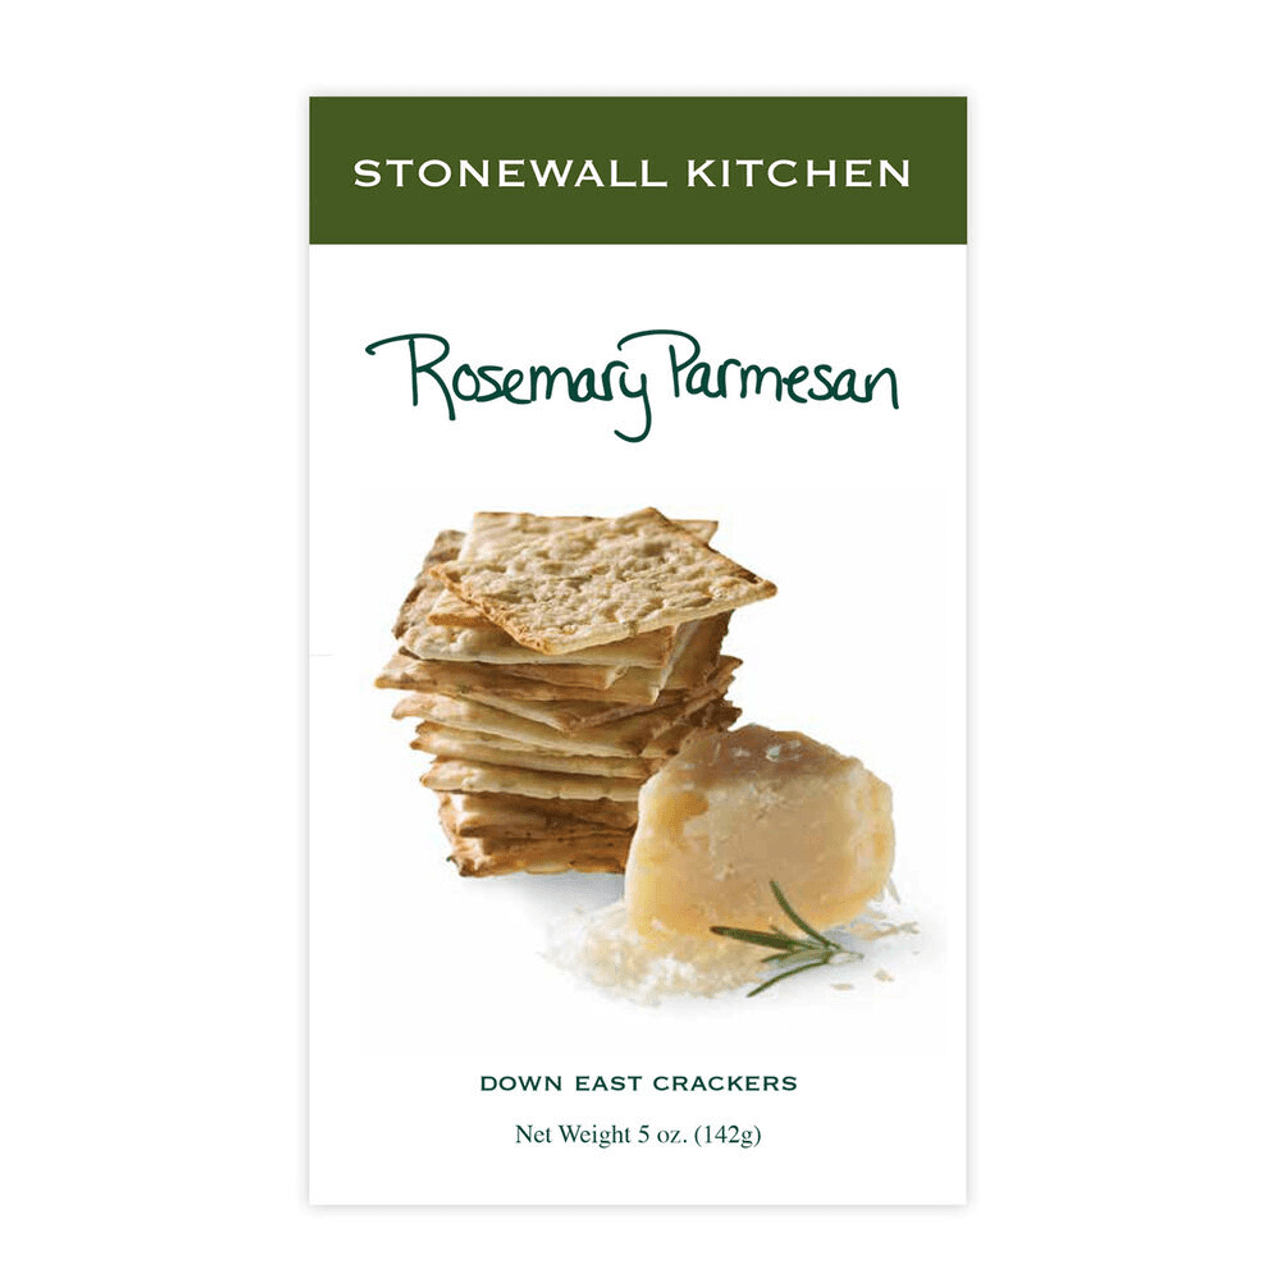 Stonewall Kitchen Rosemary Parmesan Down East Crackers